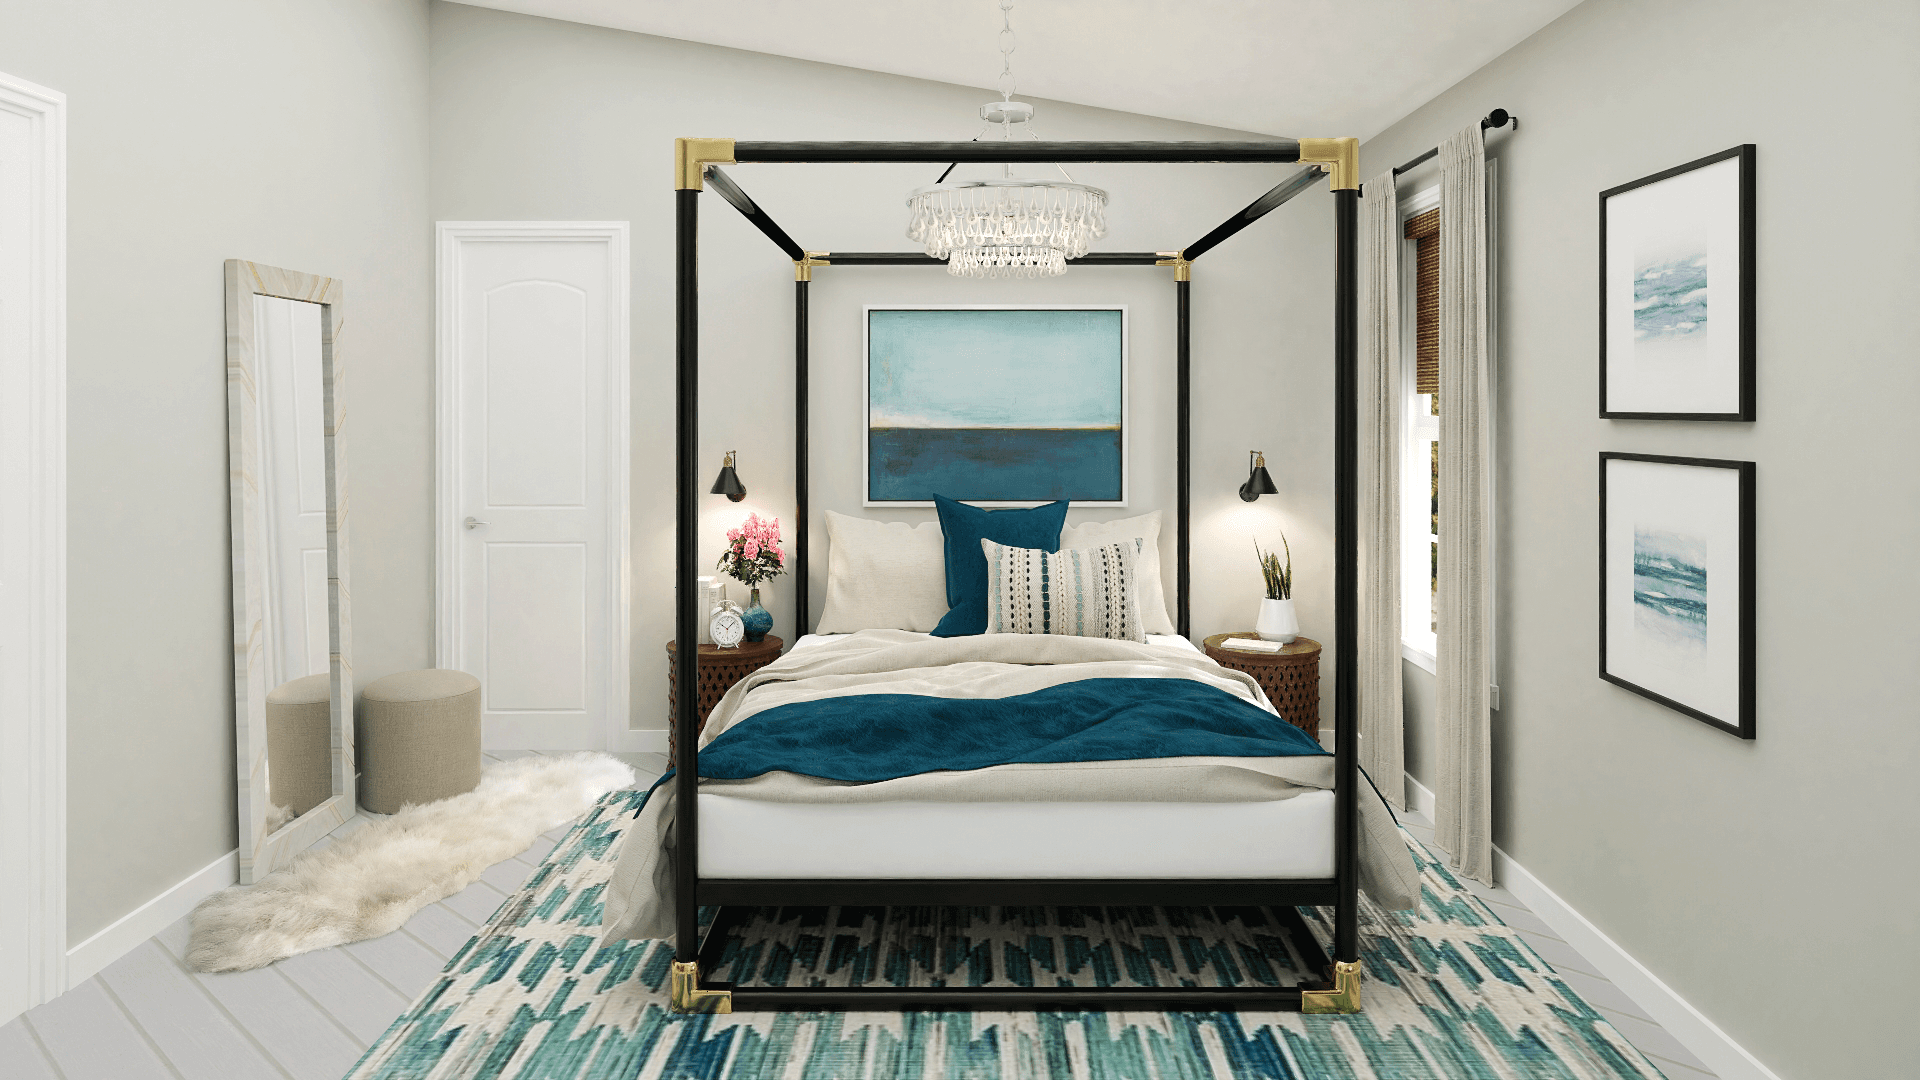 A Glam Bedroom In Coastal Blues